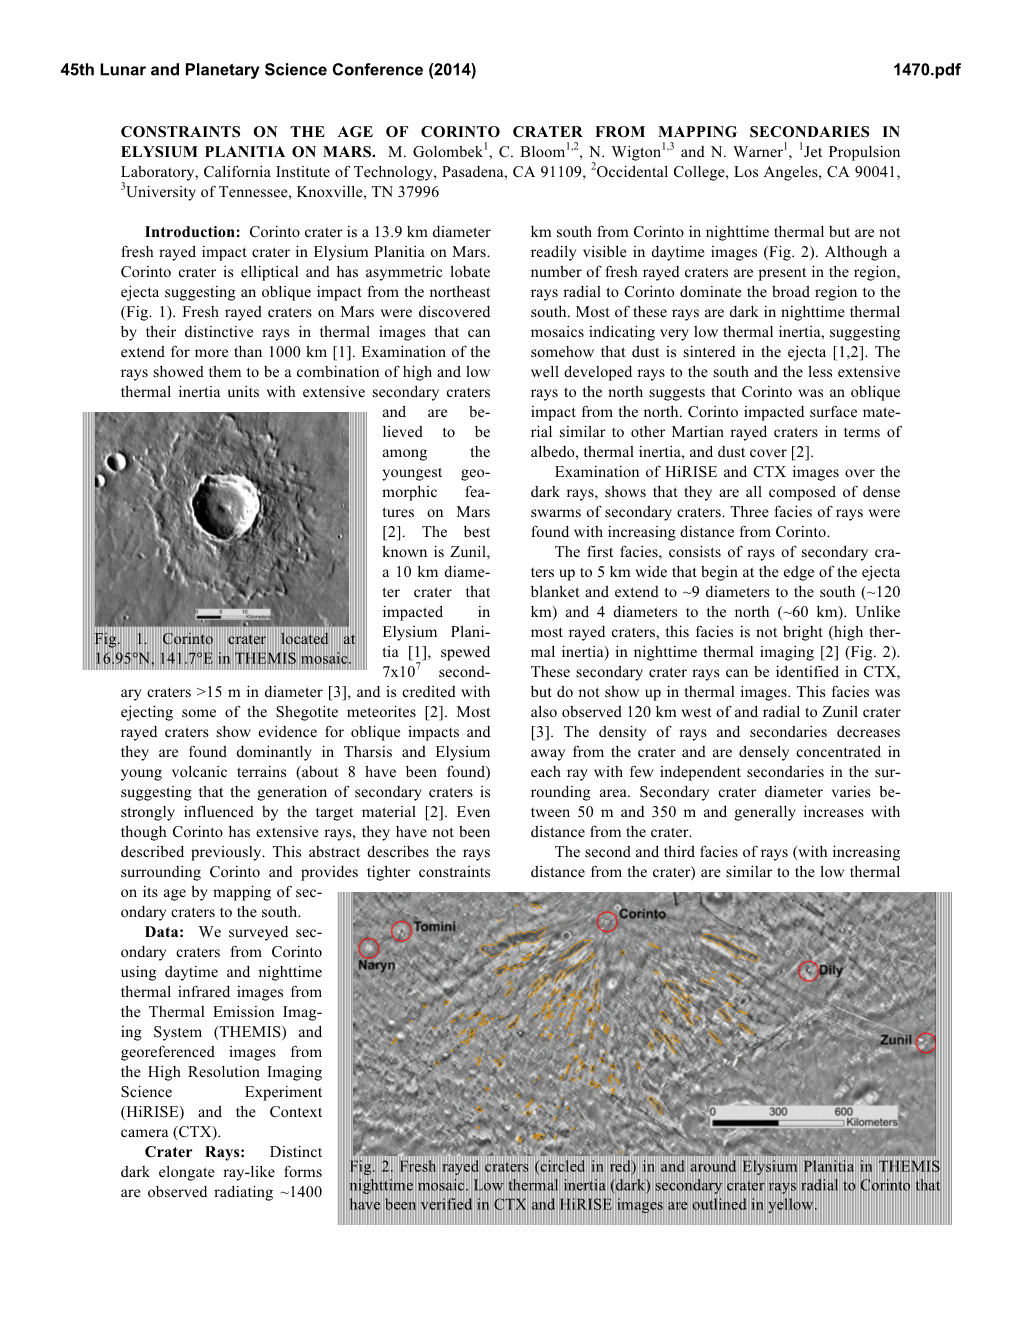 Constraints on the Age of Corinto Crater from Mapping Secondaries in Elysium Planitia on Mars